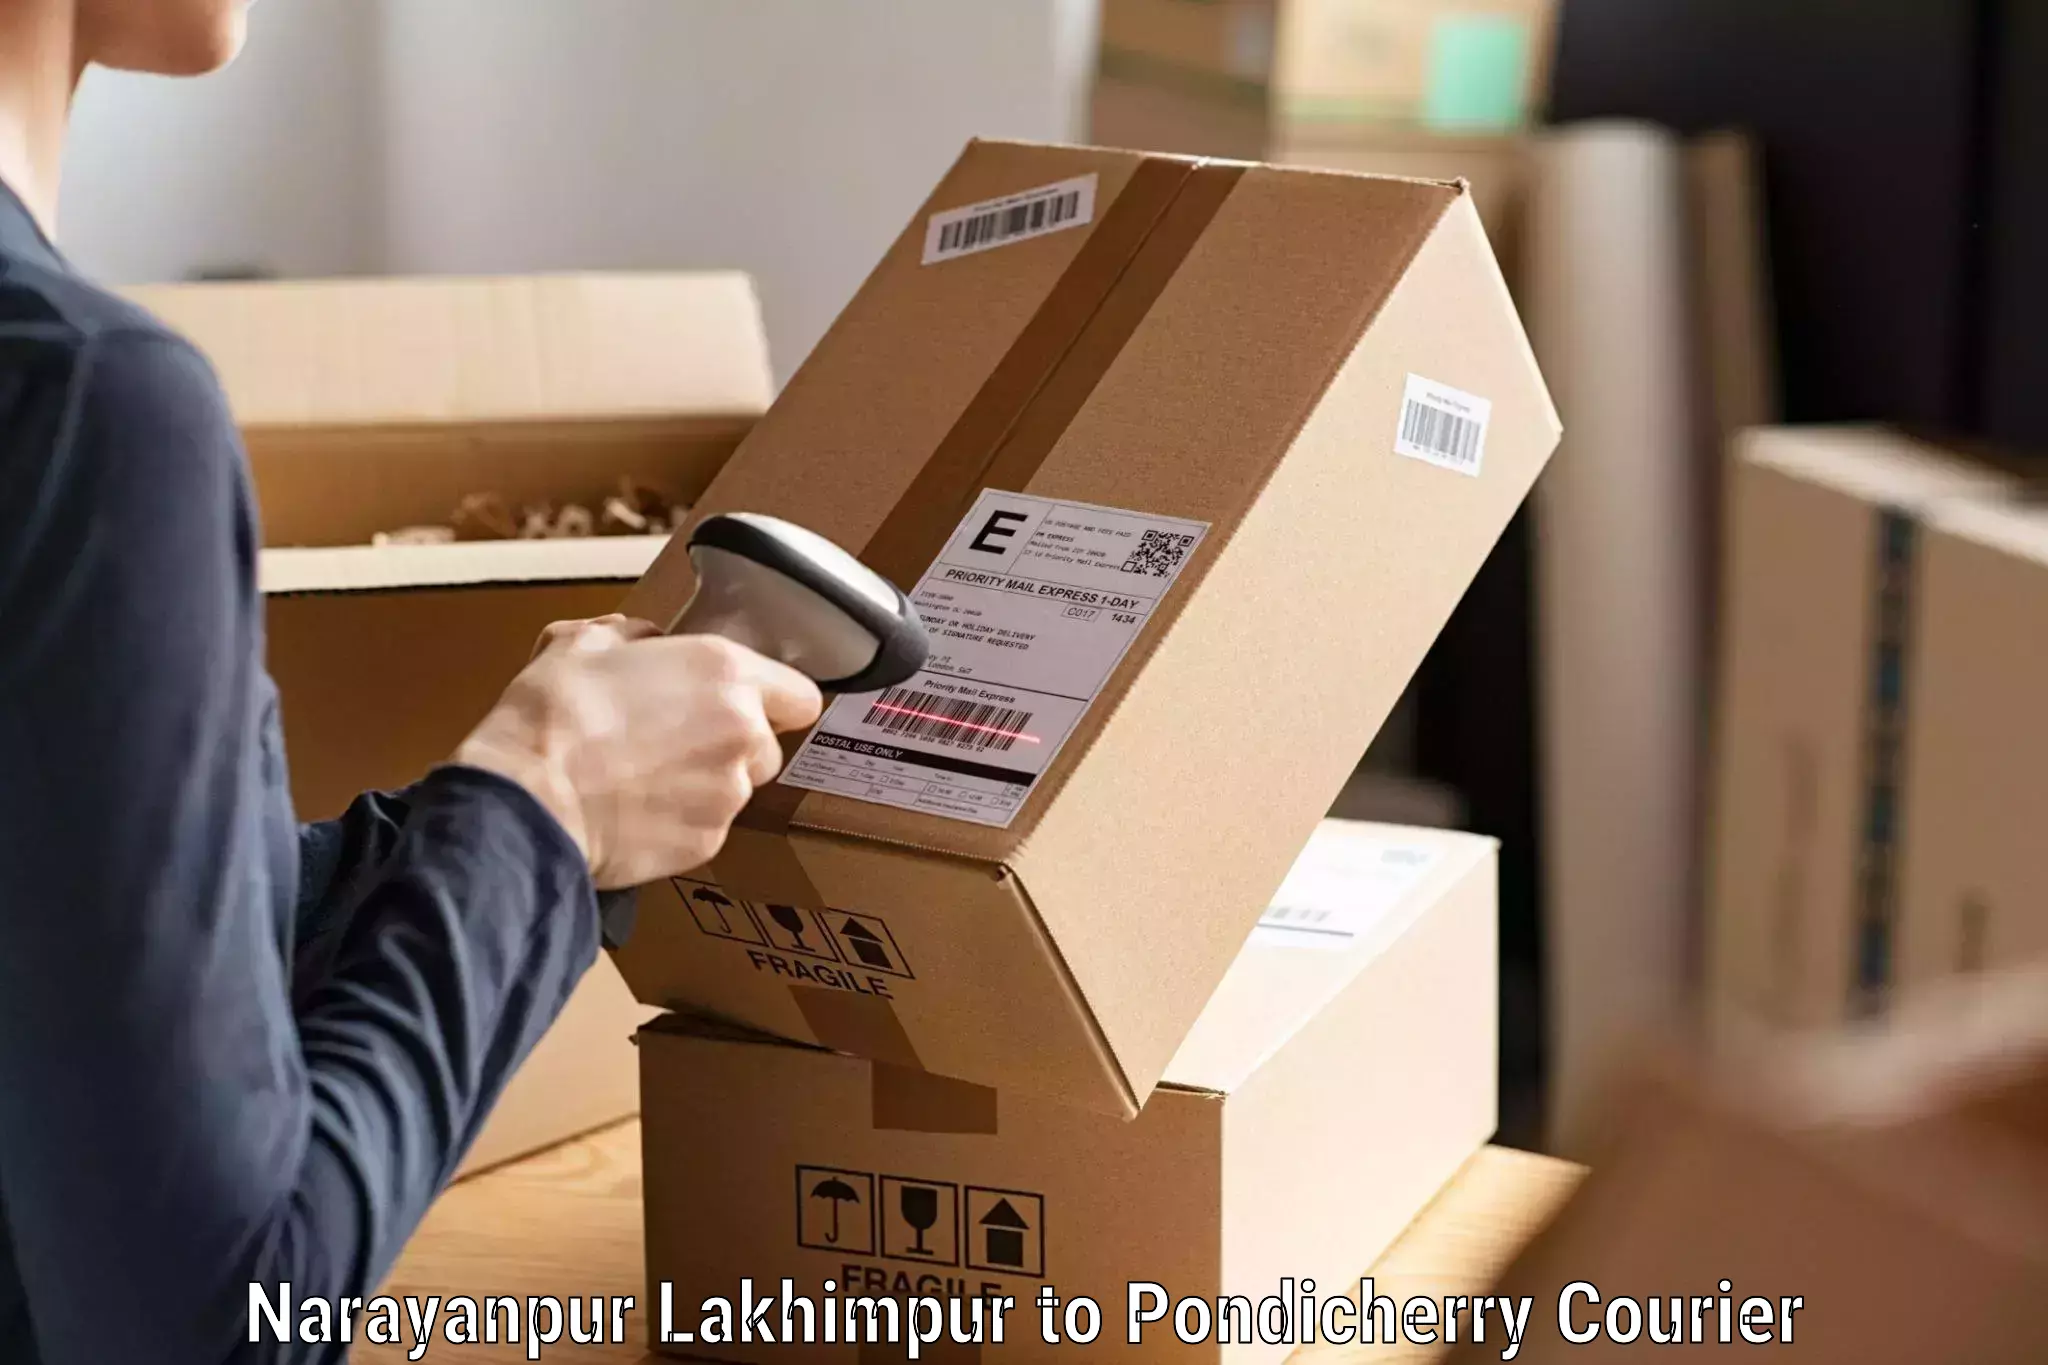 Package delivery network Narayanpur Lakhimpur to Metttupalayam